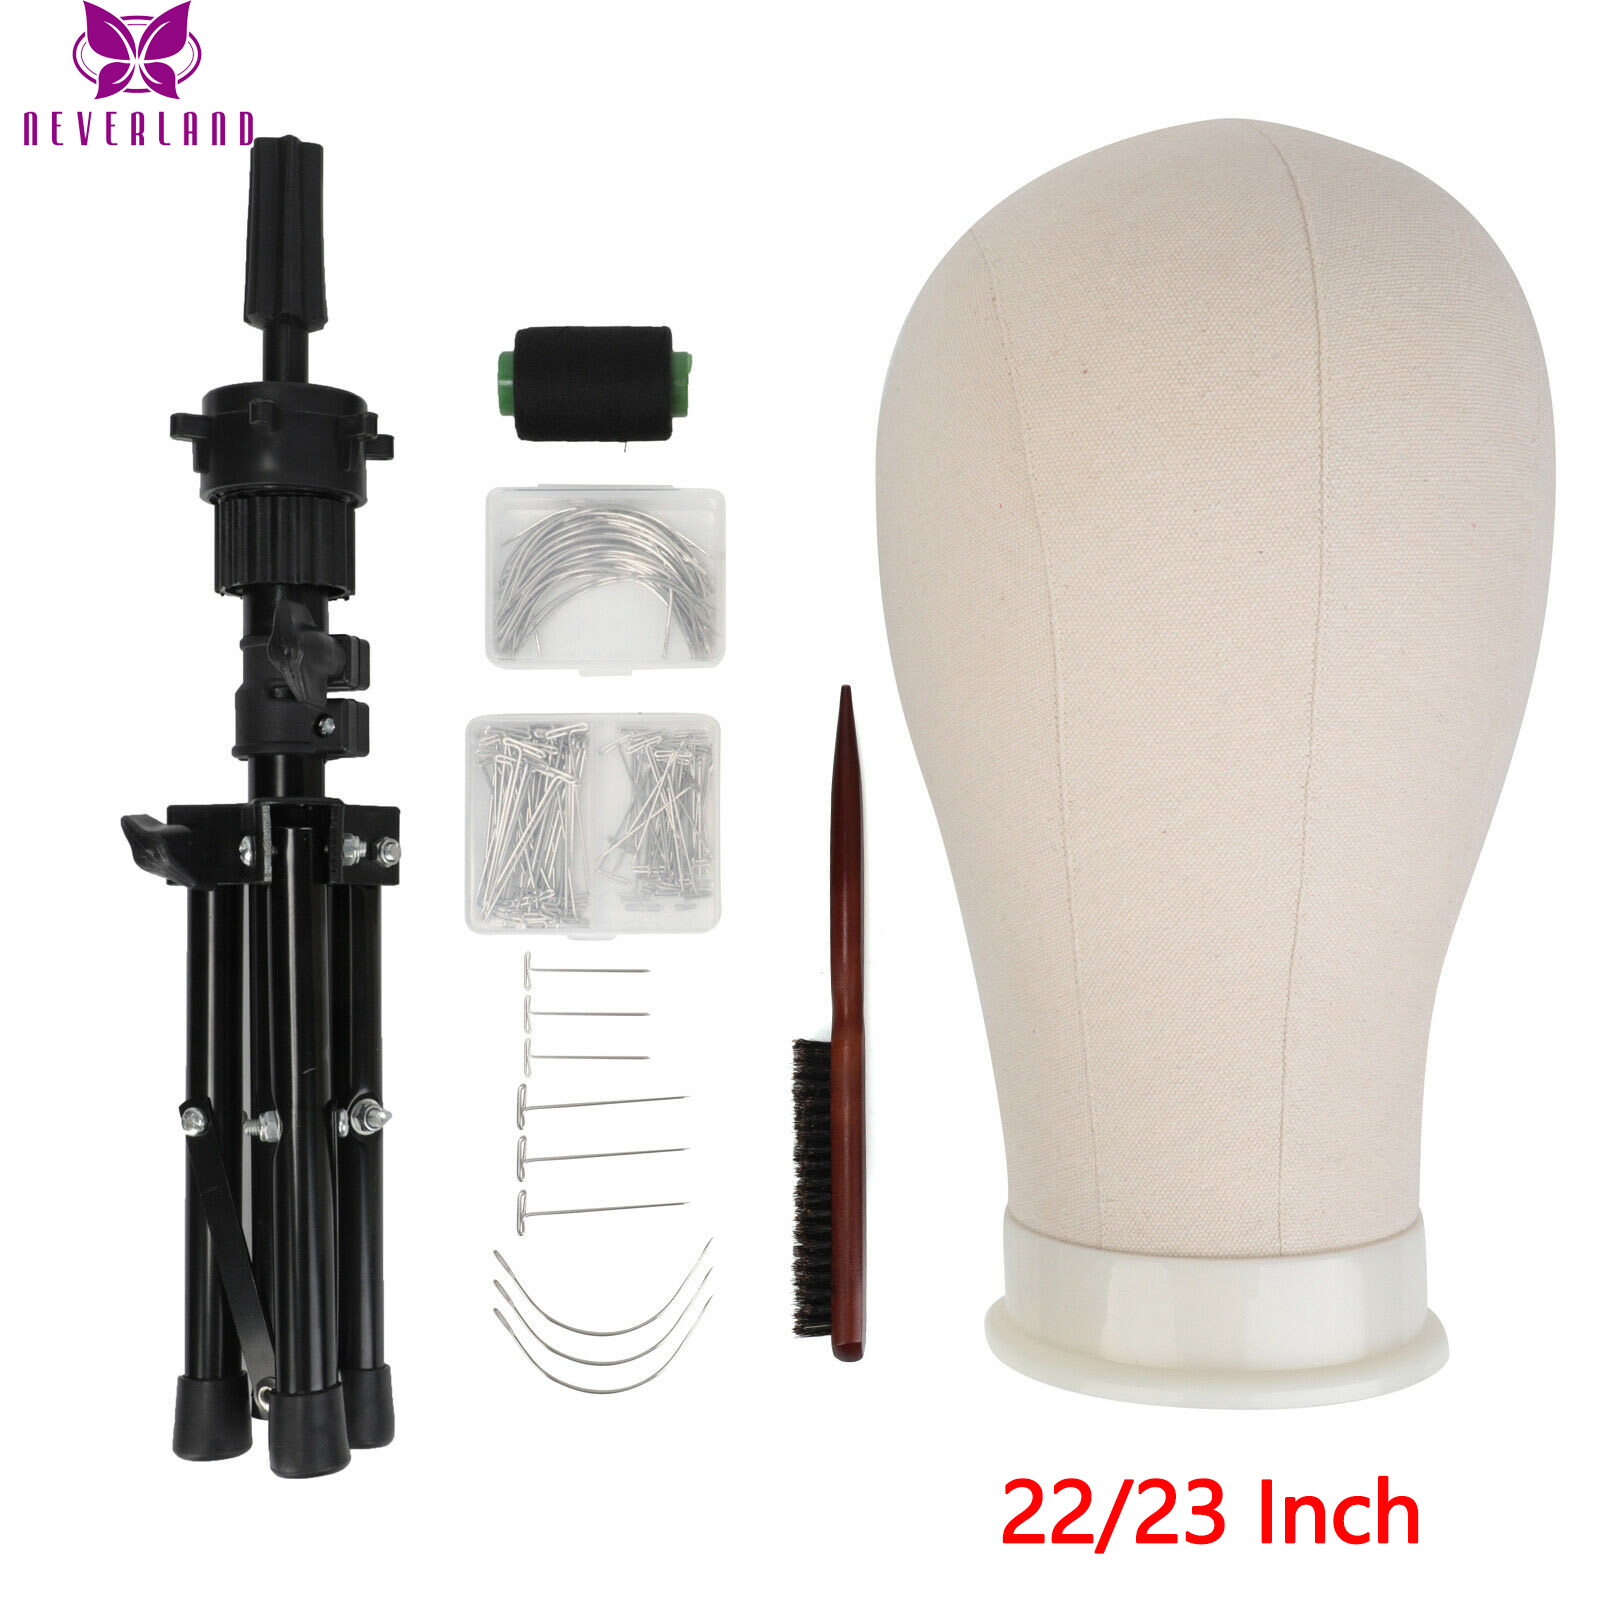 22/23''Training Mannequin Head Canvas Block Head Display Styling Manikin Head Wig Stand with T Pins Needles with Tripod and Comb